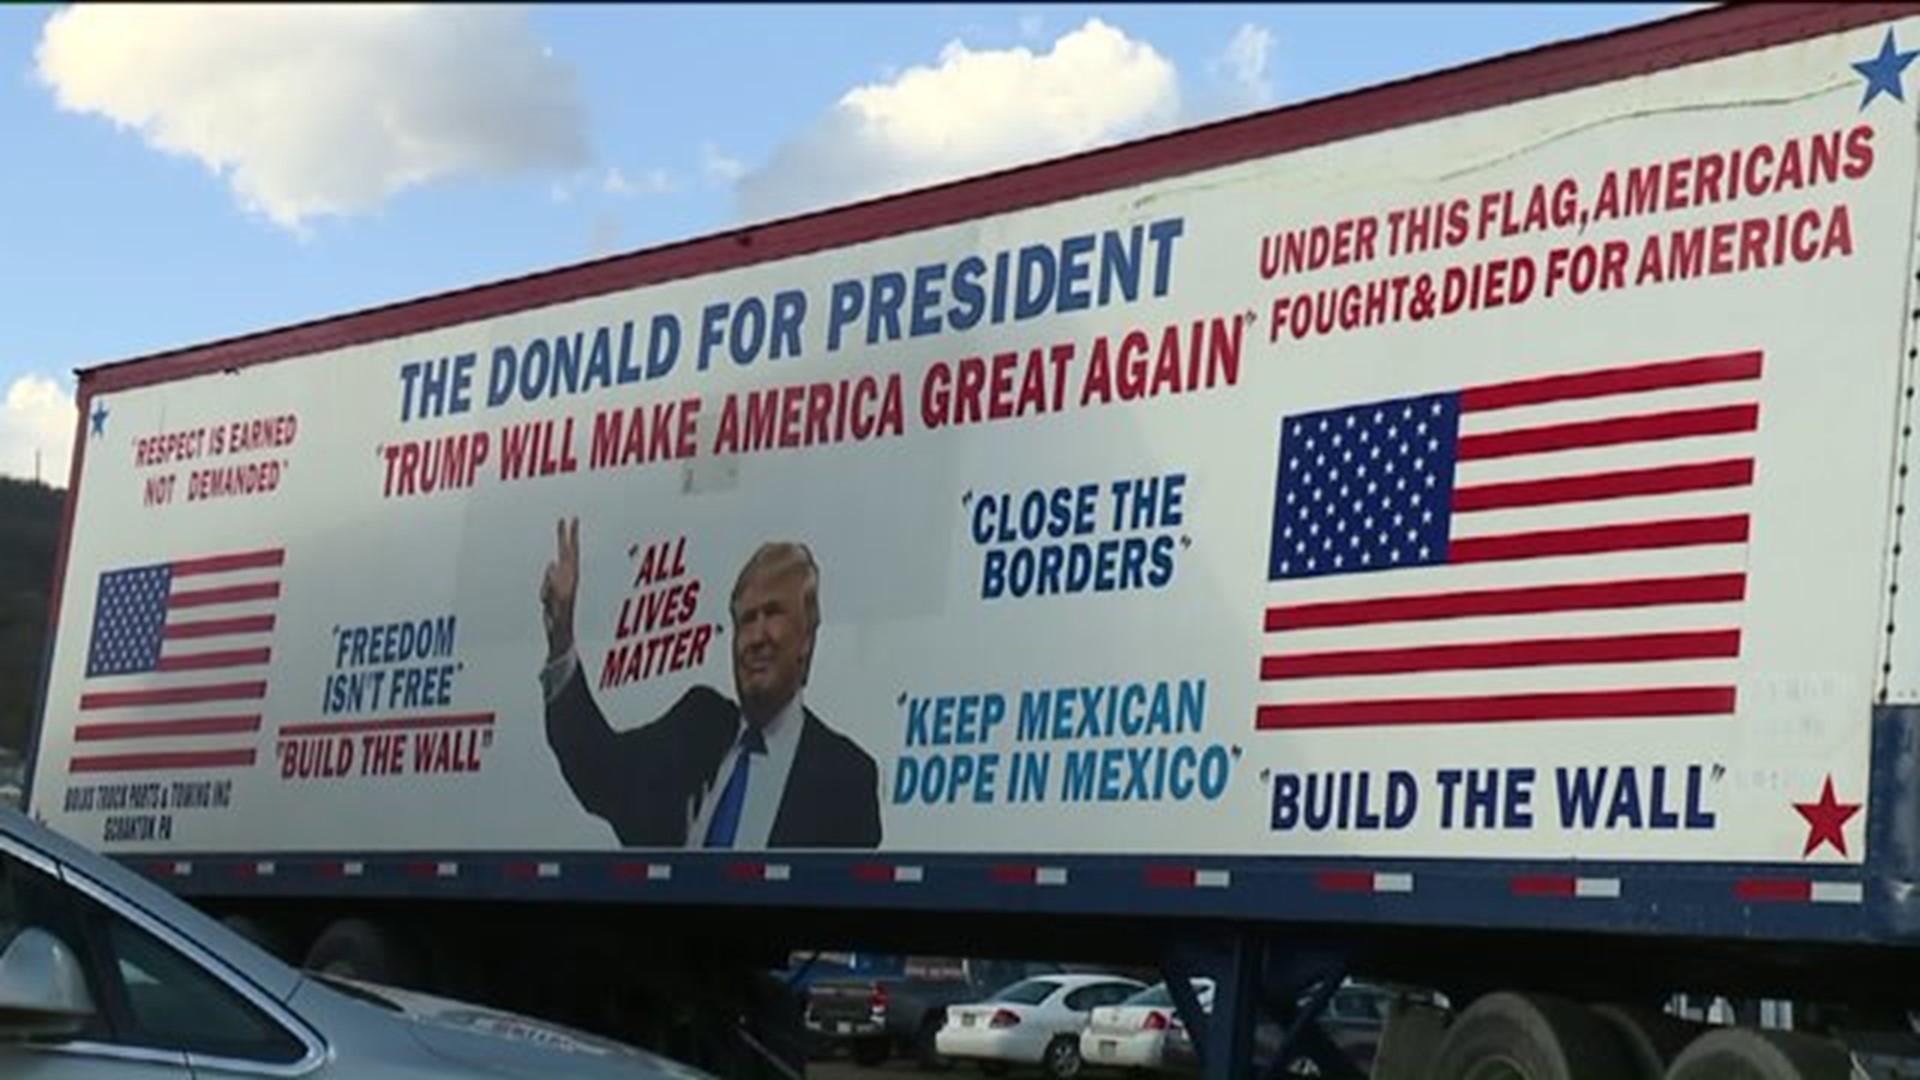 Truck Decked out in Trump Ads Donated by Businessman Bob Bolus